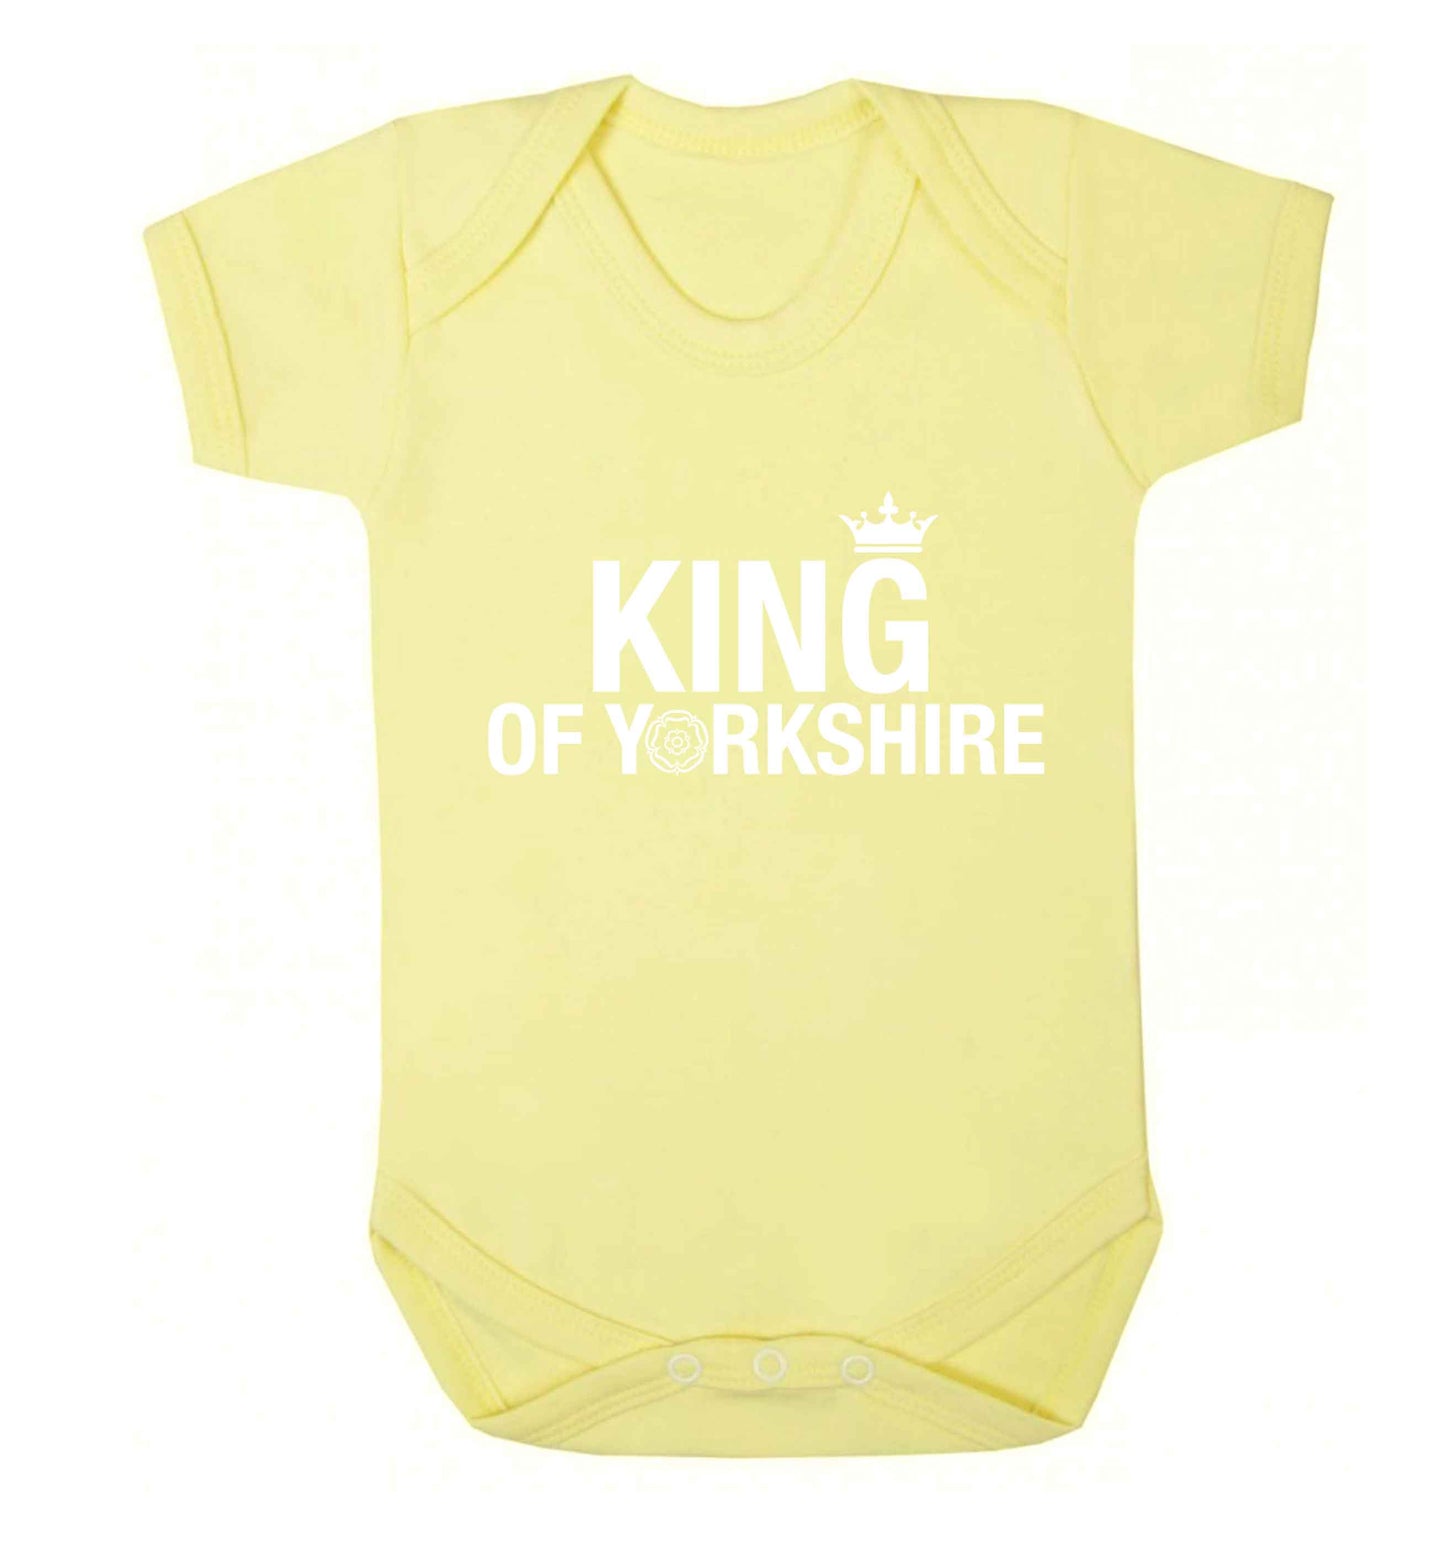 King of Yorkshire Baby Vest pale yellow 18-24 months